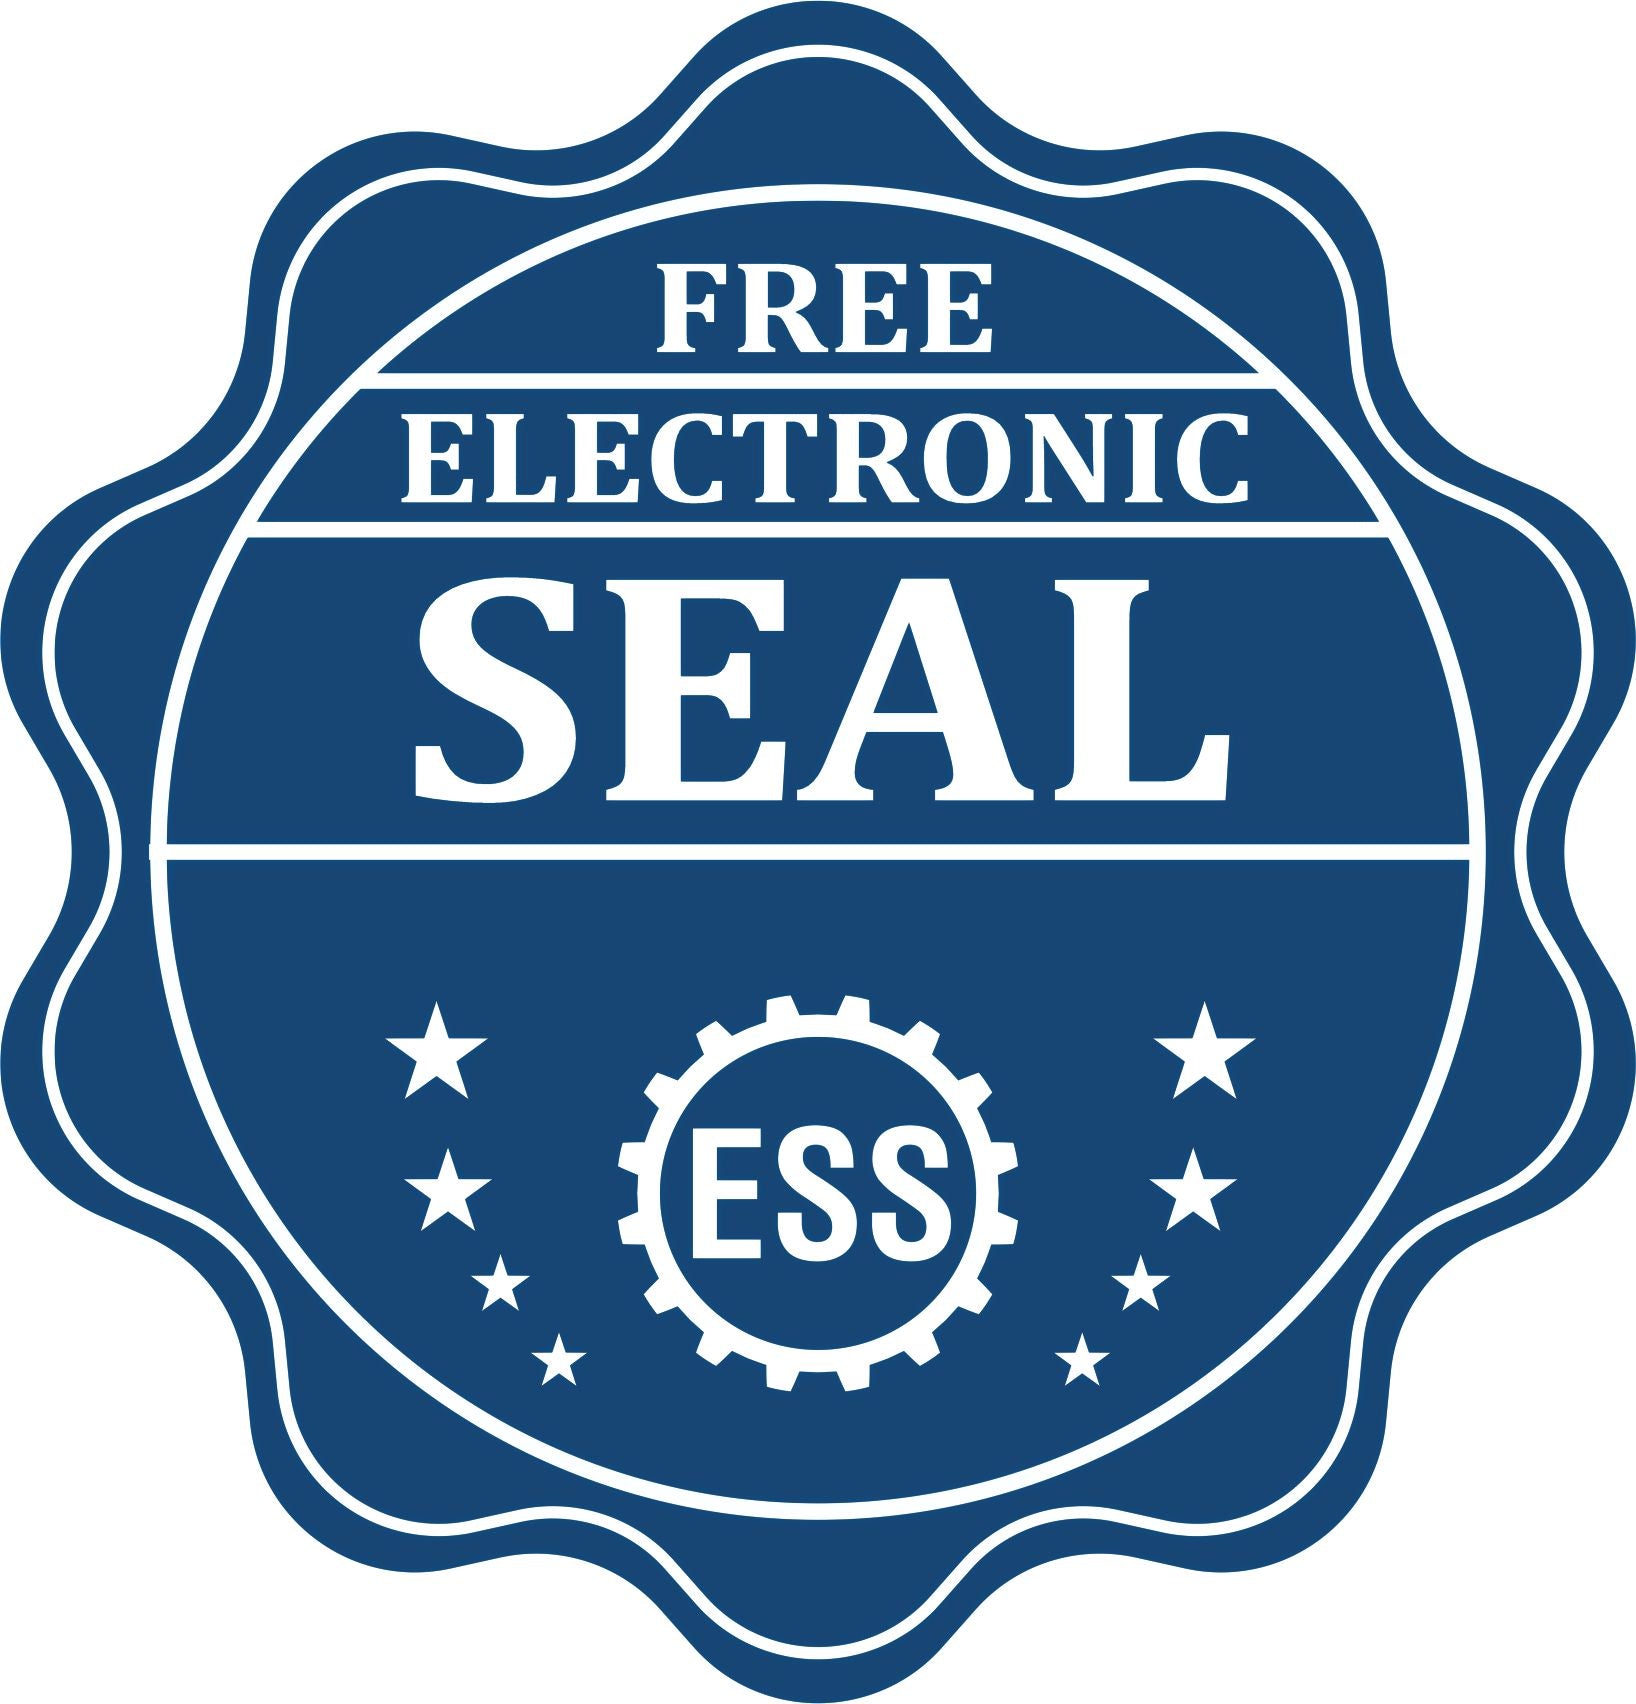 A badge showing a free electronic seal for the Hybrid Nevada Land Surveyor Seal with stars and the ESS gear on the emblem.